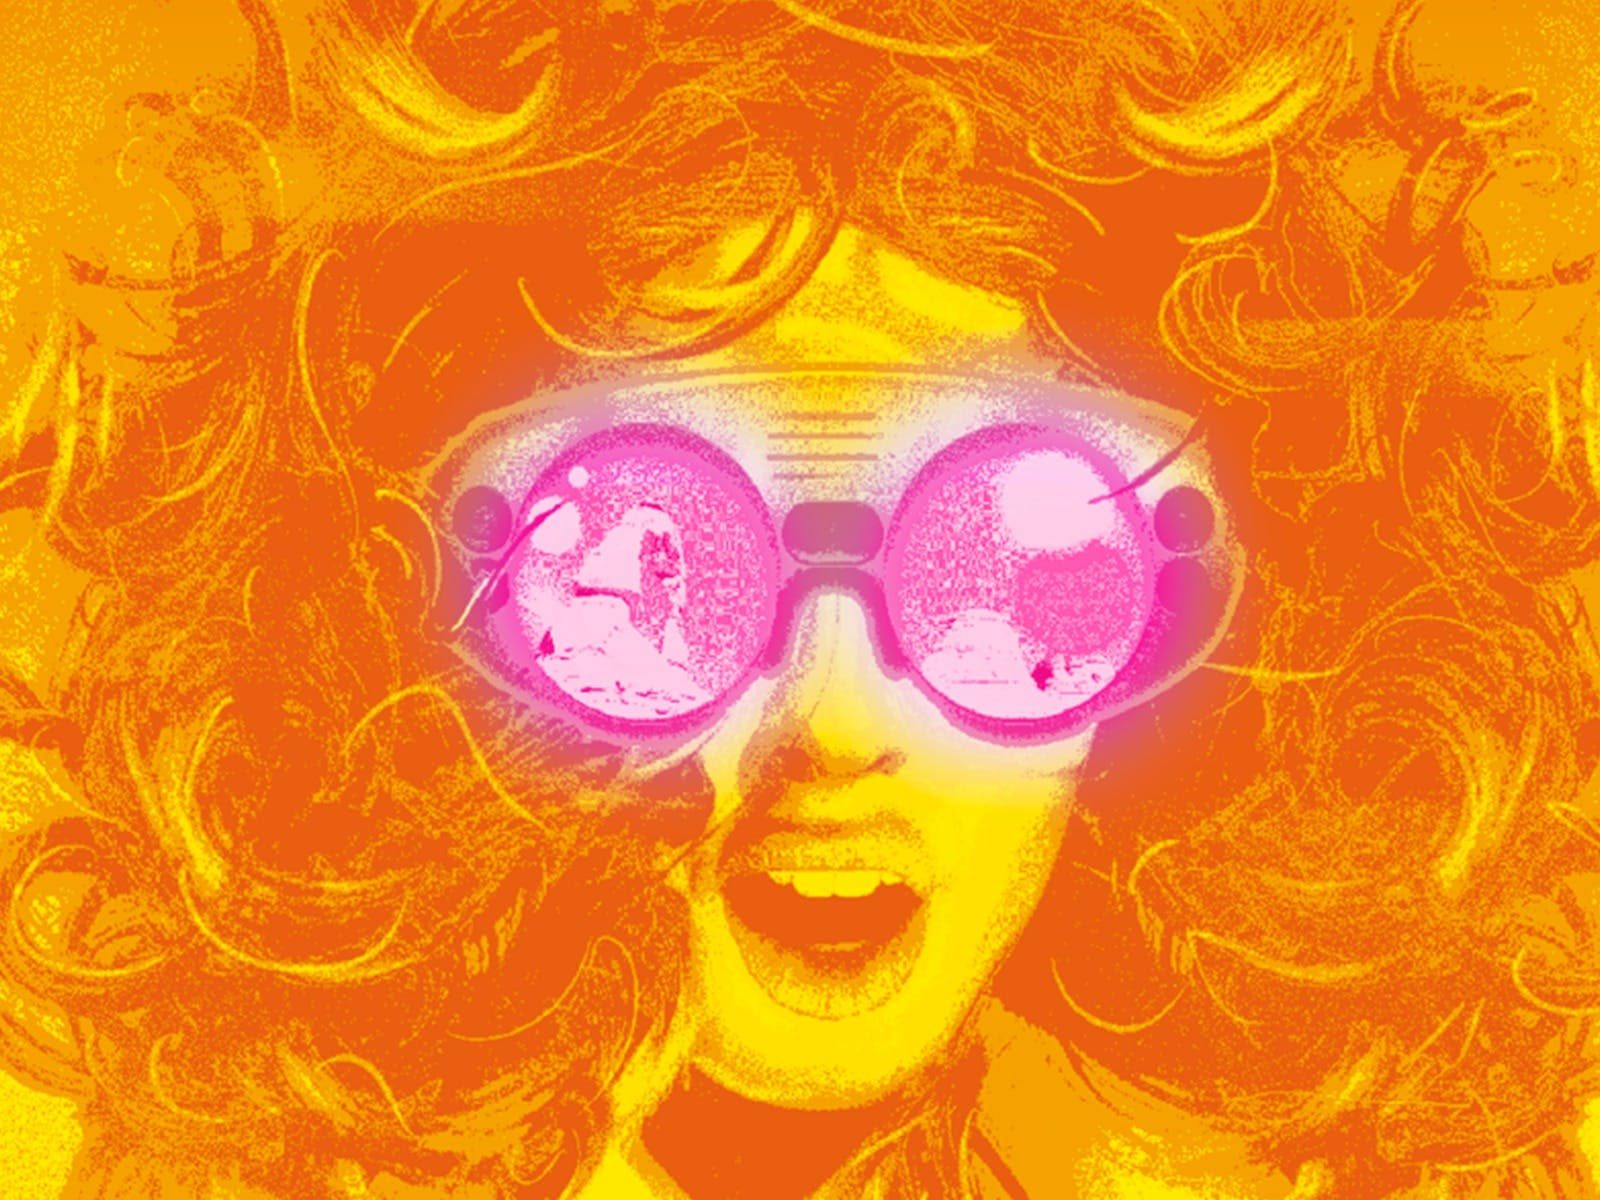 Orange and yellow cartoon human face wearing pink VR goggles